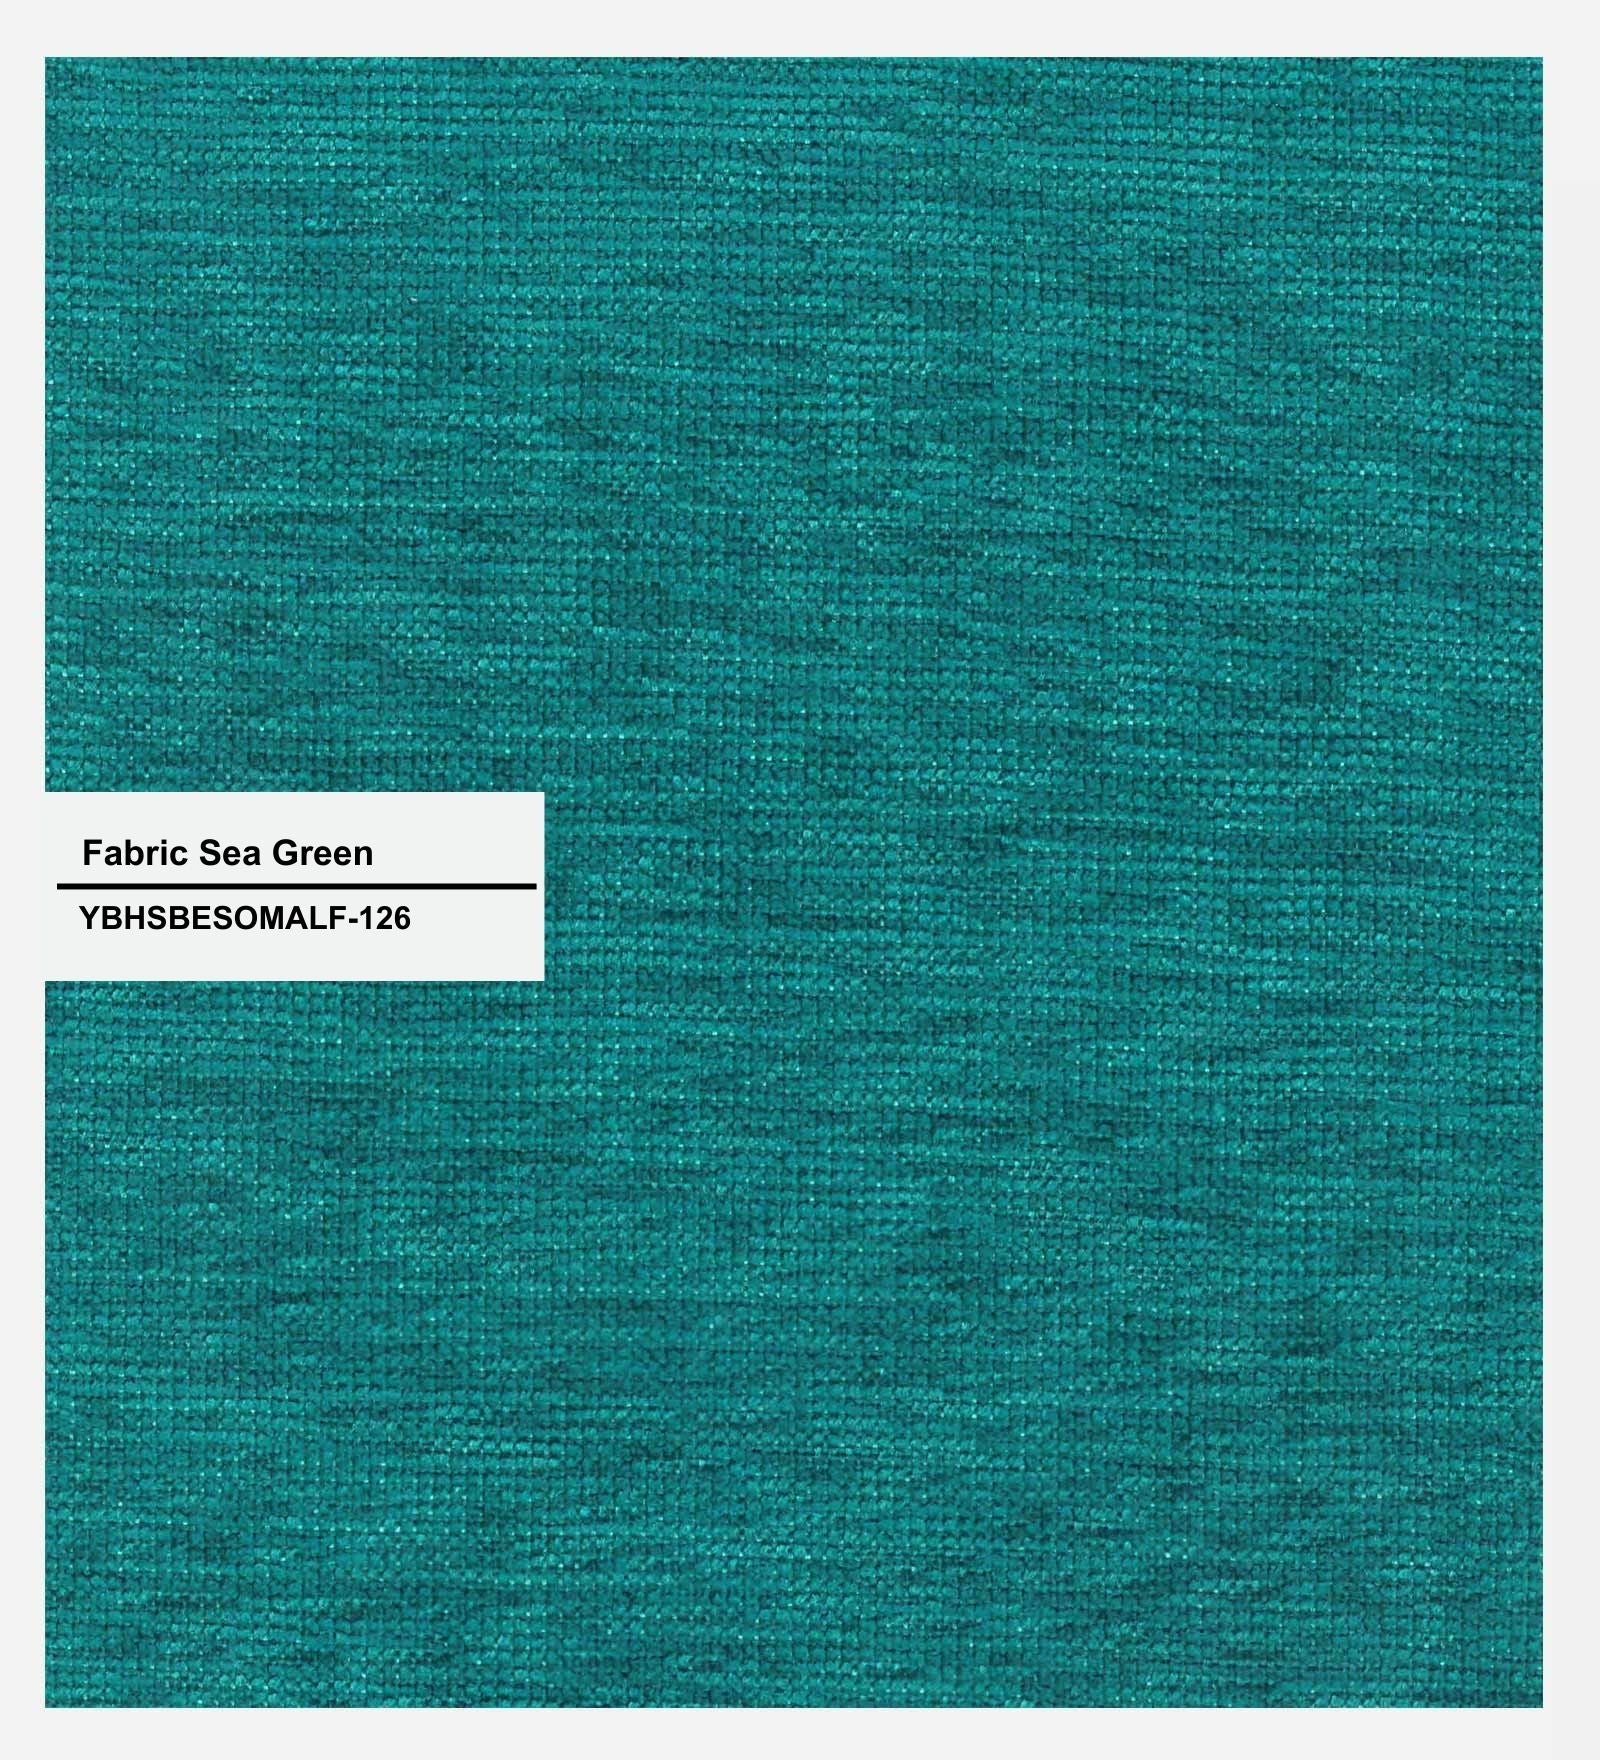 Lido Fabric Queen Size Bed In Sea Green Colour With Storage